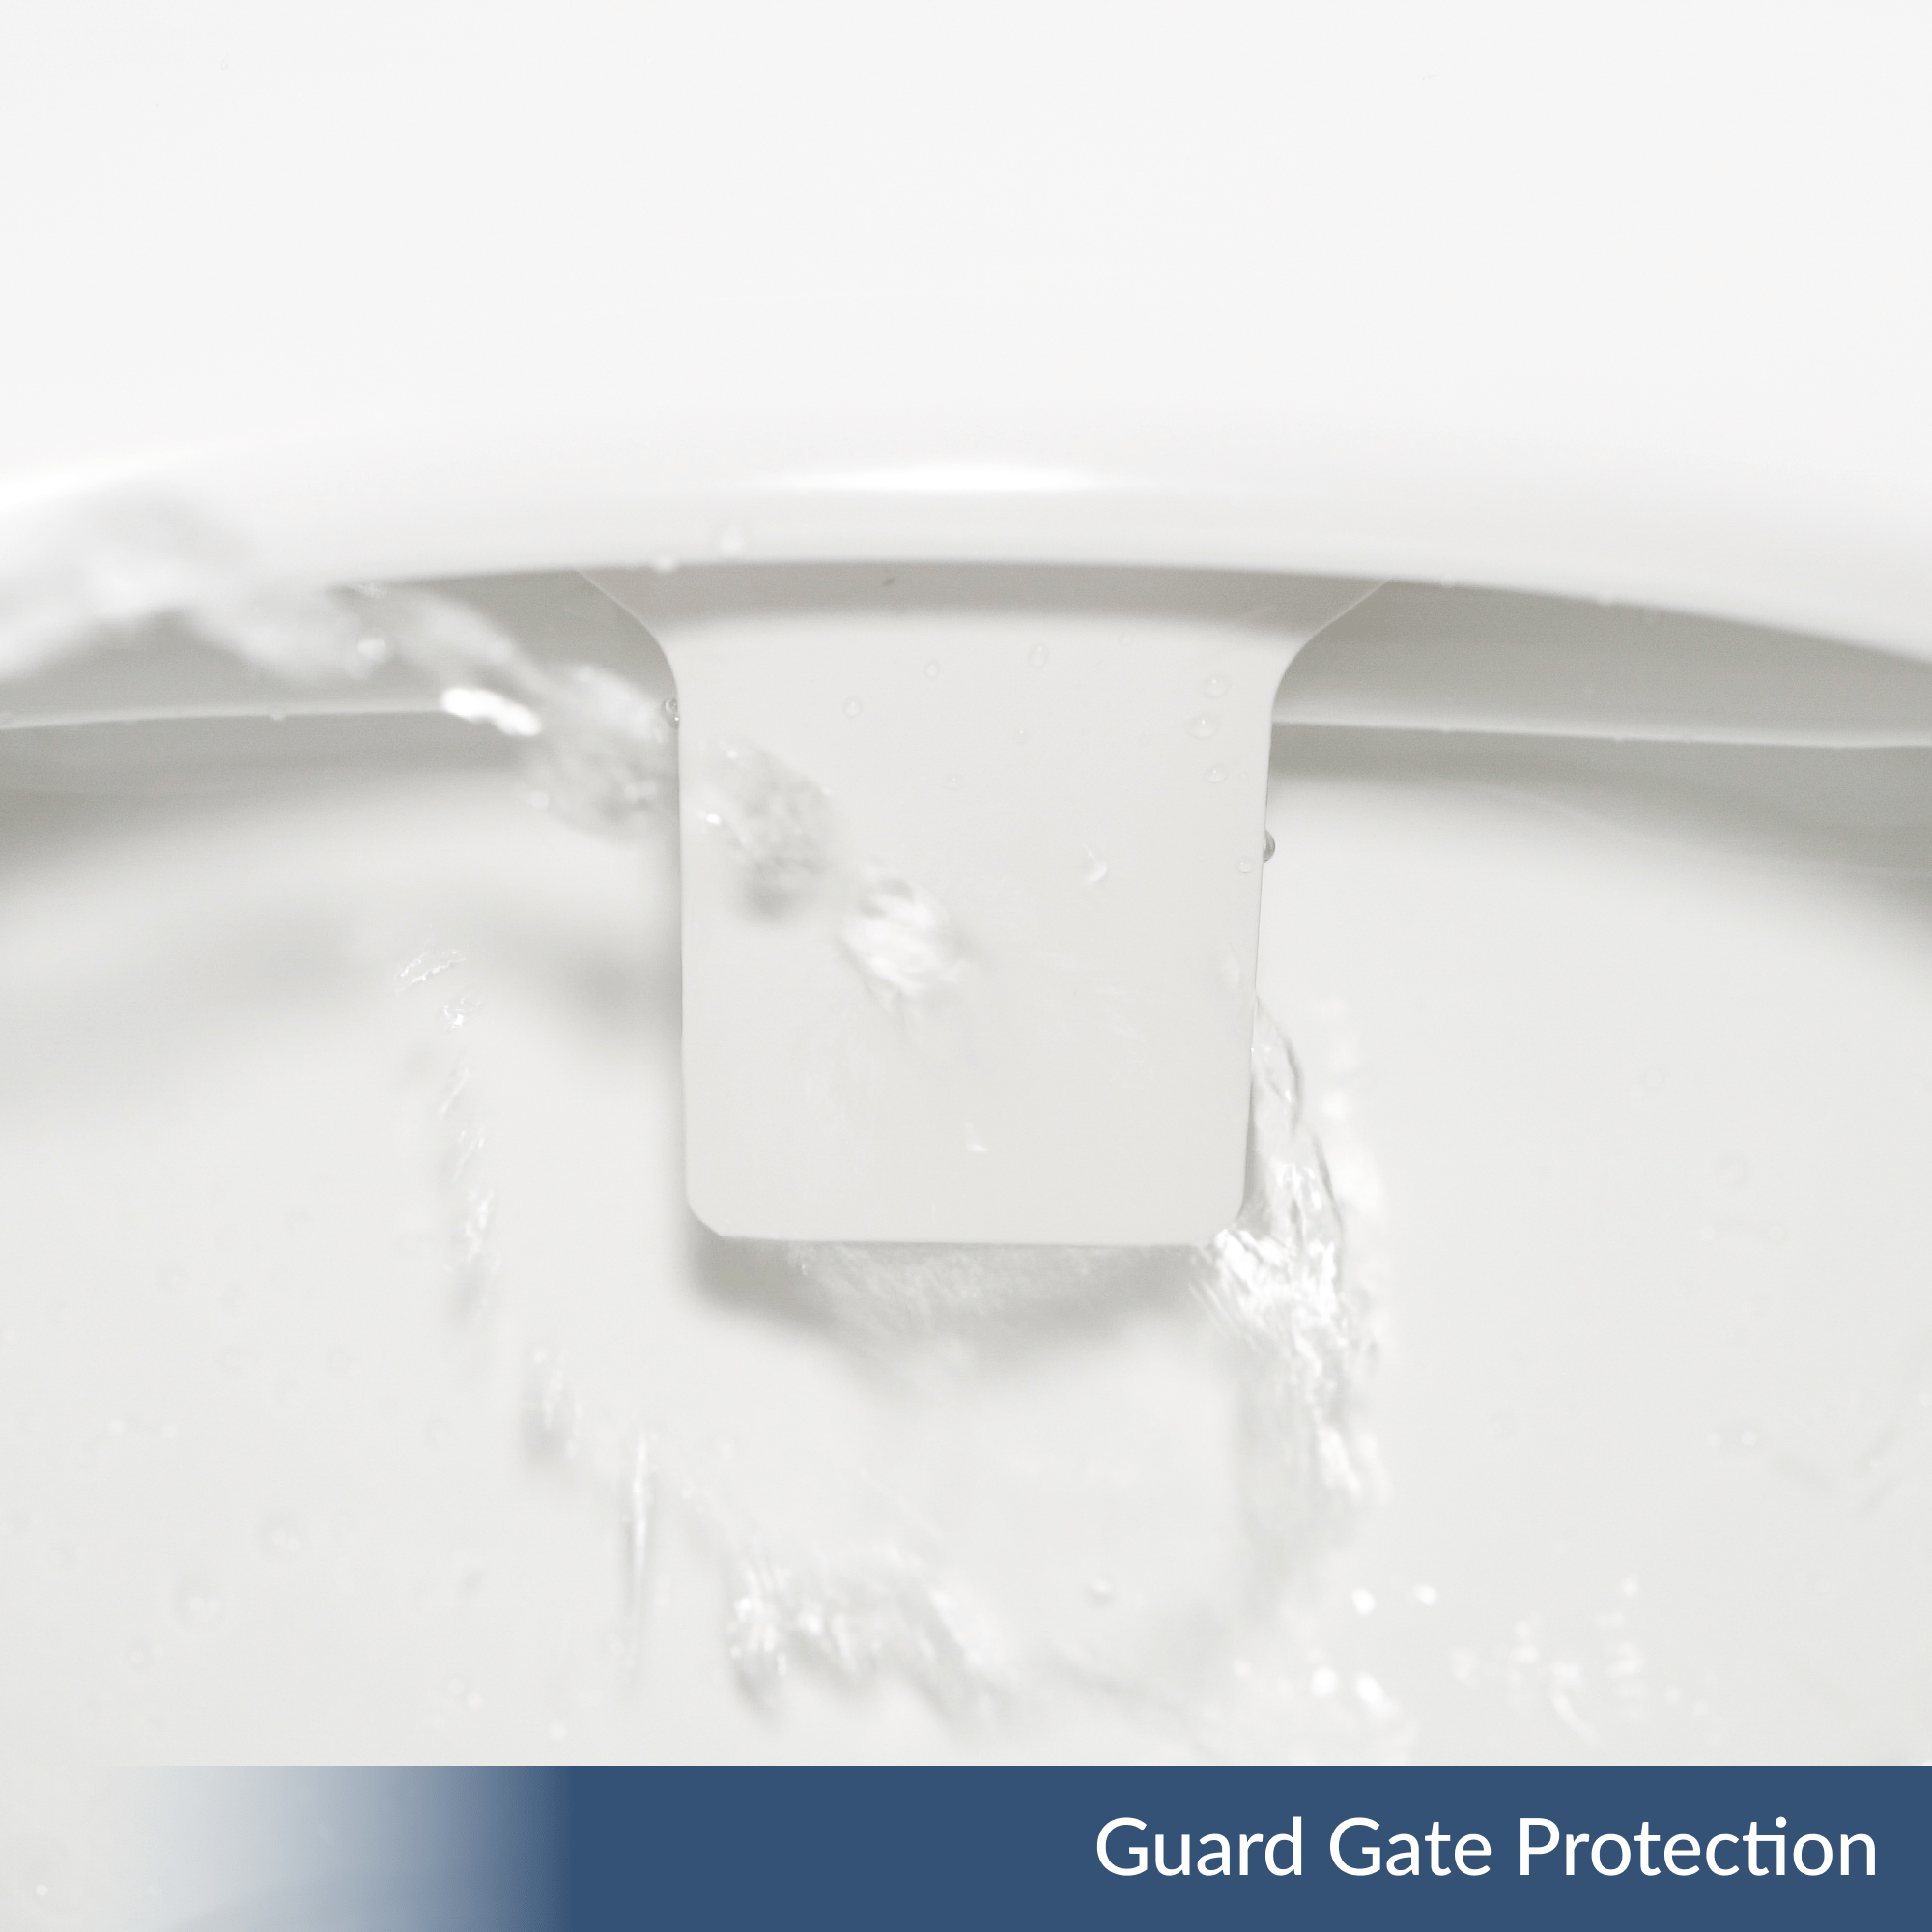 NEO 320 Plus: Imperfect Packaging - The Guard Gate protects the wash nozzles from splash back